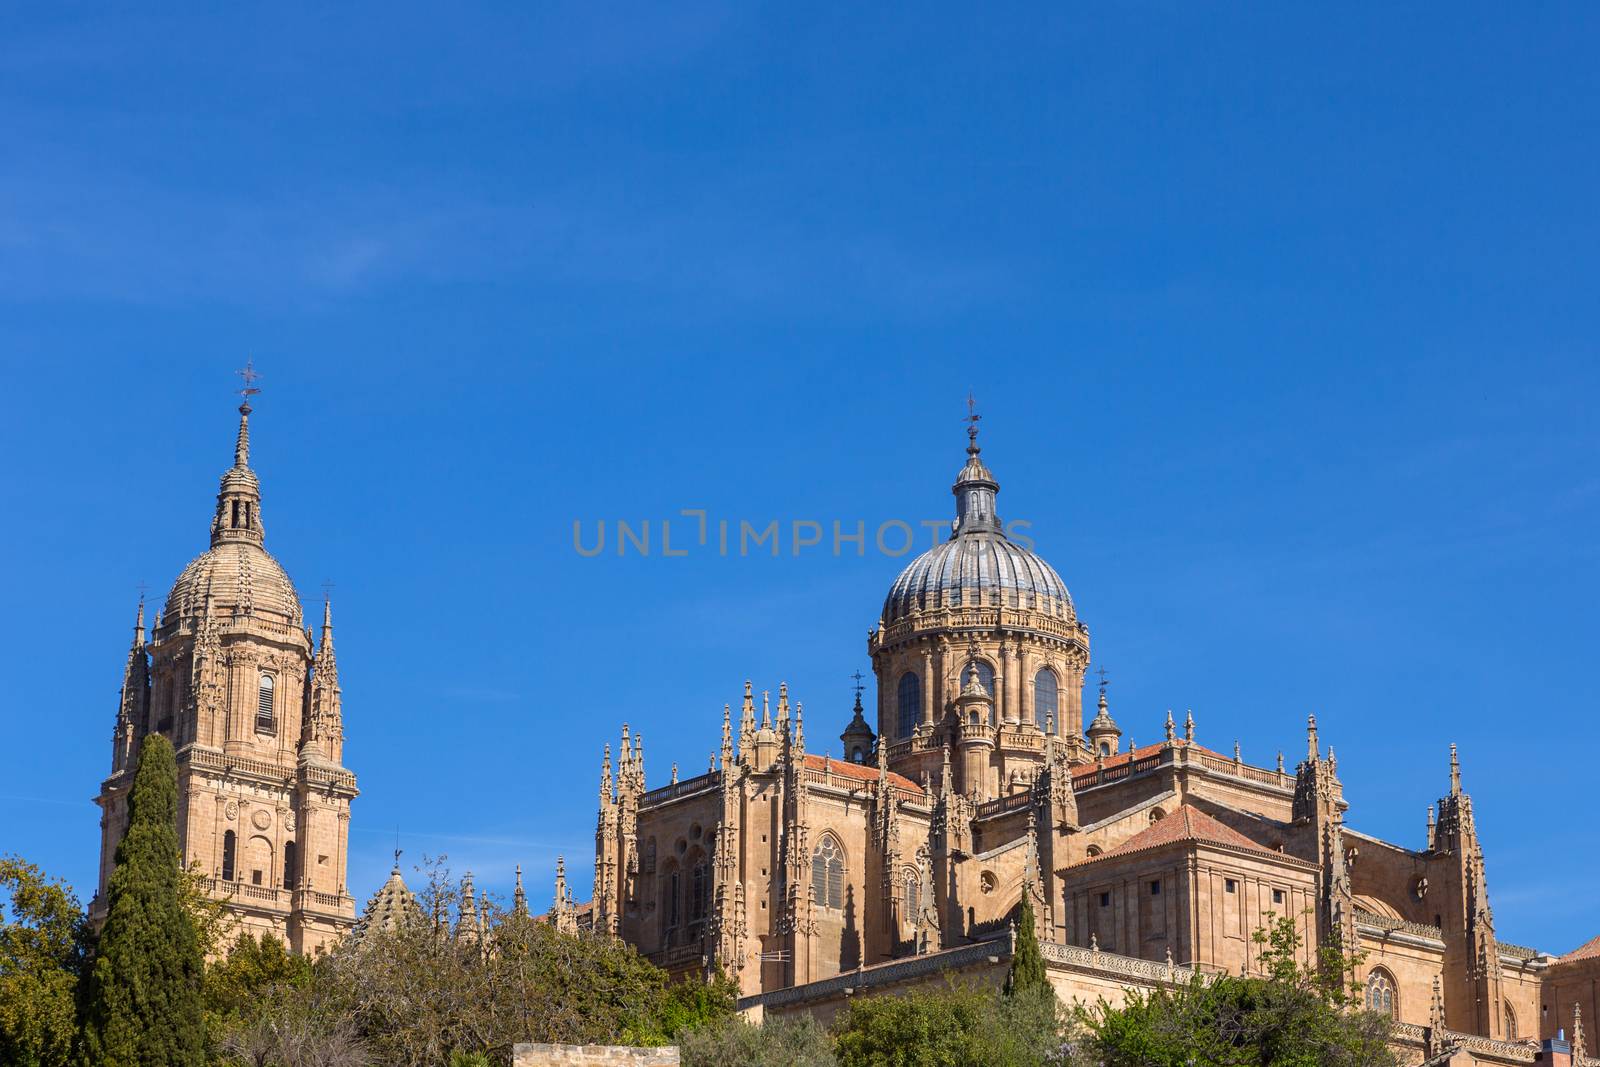 View of the dome of the historical Salamanca Cathedral, Spain